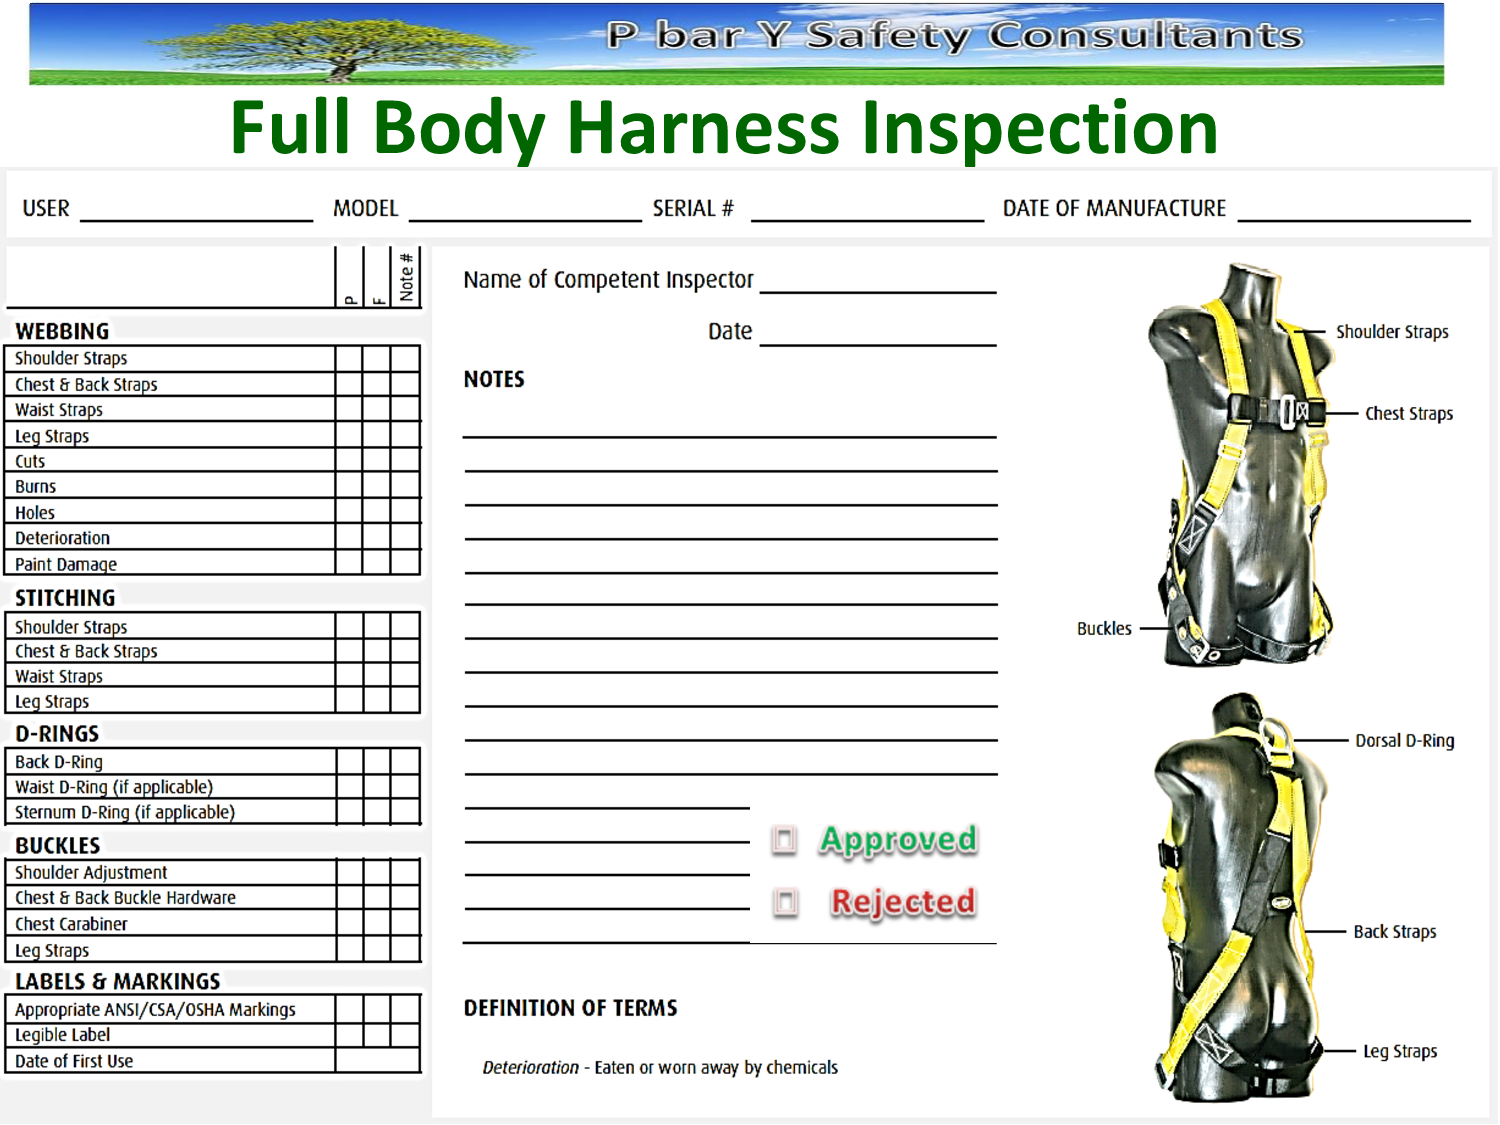 Full Body Harness Inspection By Tpenney